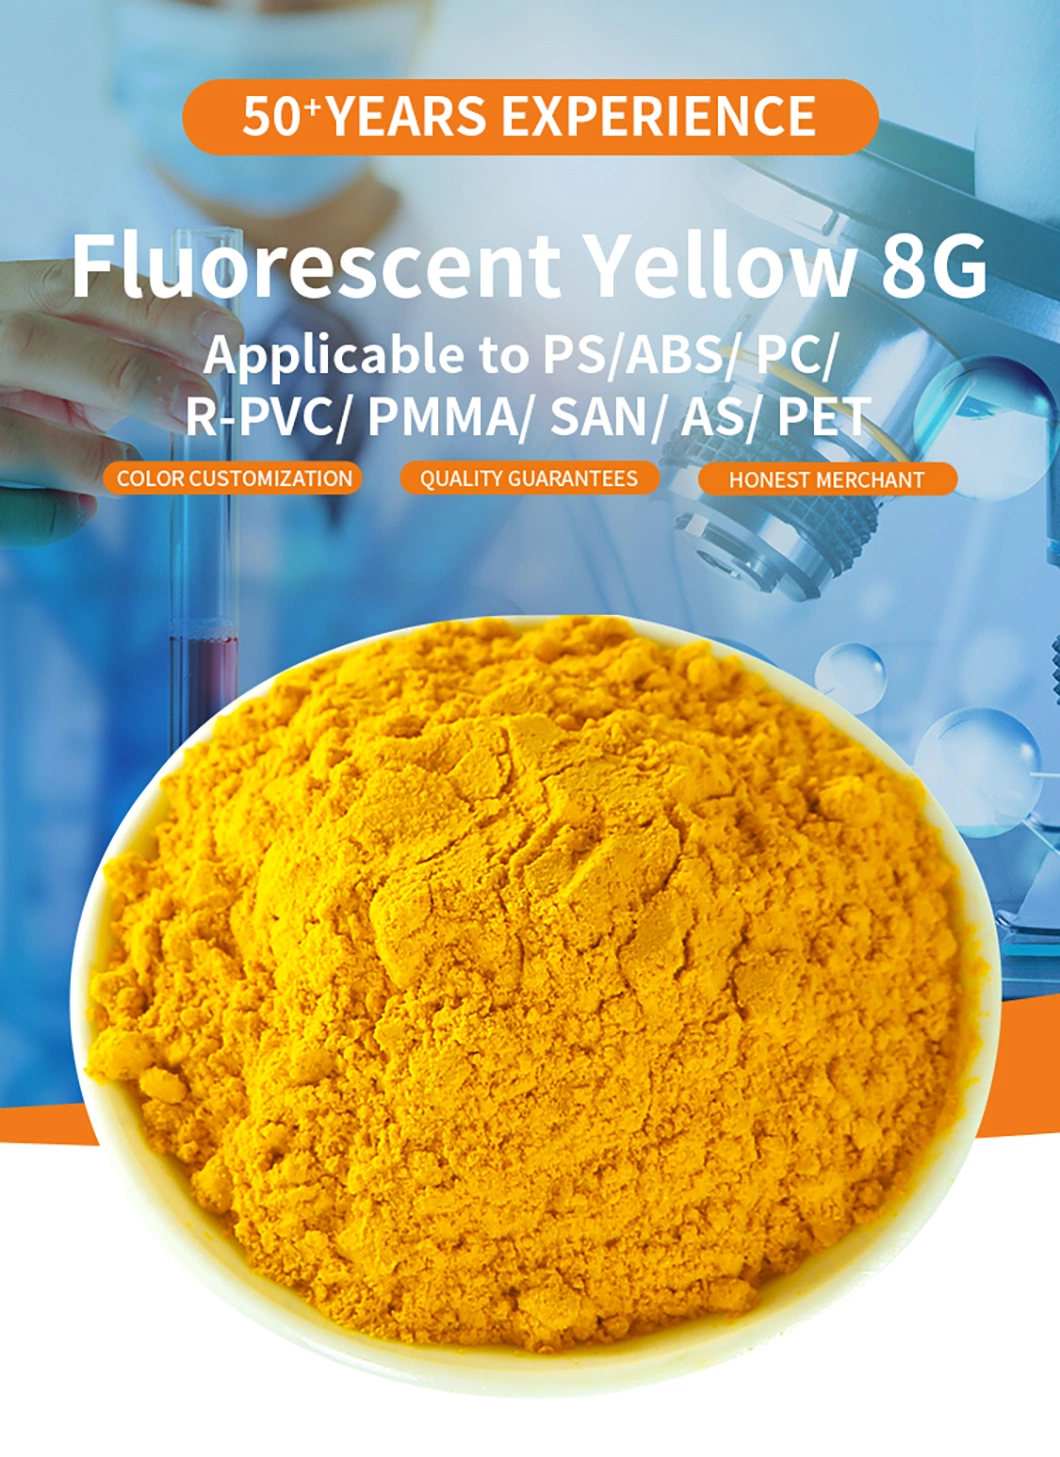 Fluorescent Yellow 8g Solvent Dye Green 5 for Plastics PS, ABS, PC, R-PVC, PMMA, San, as, Pet